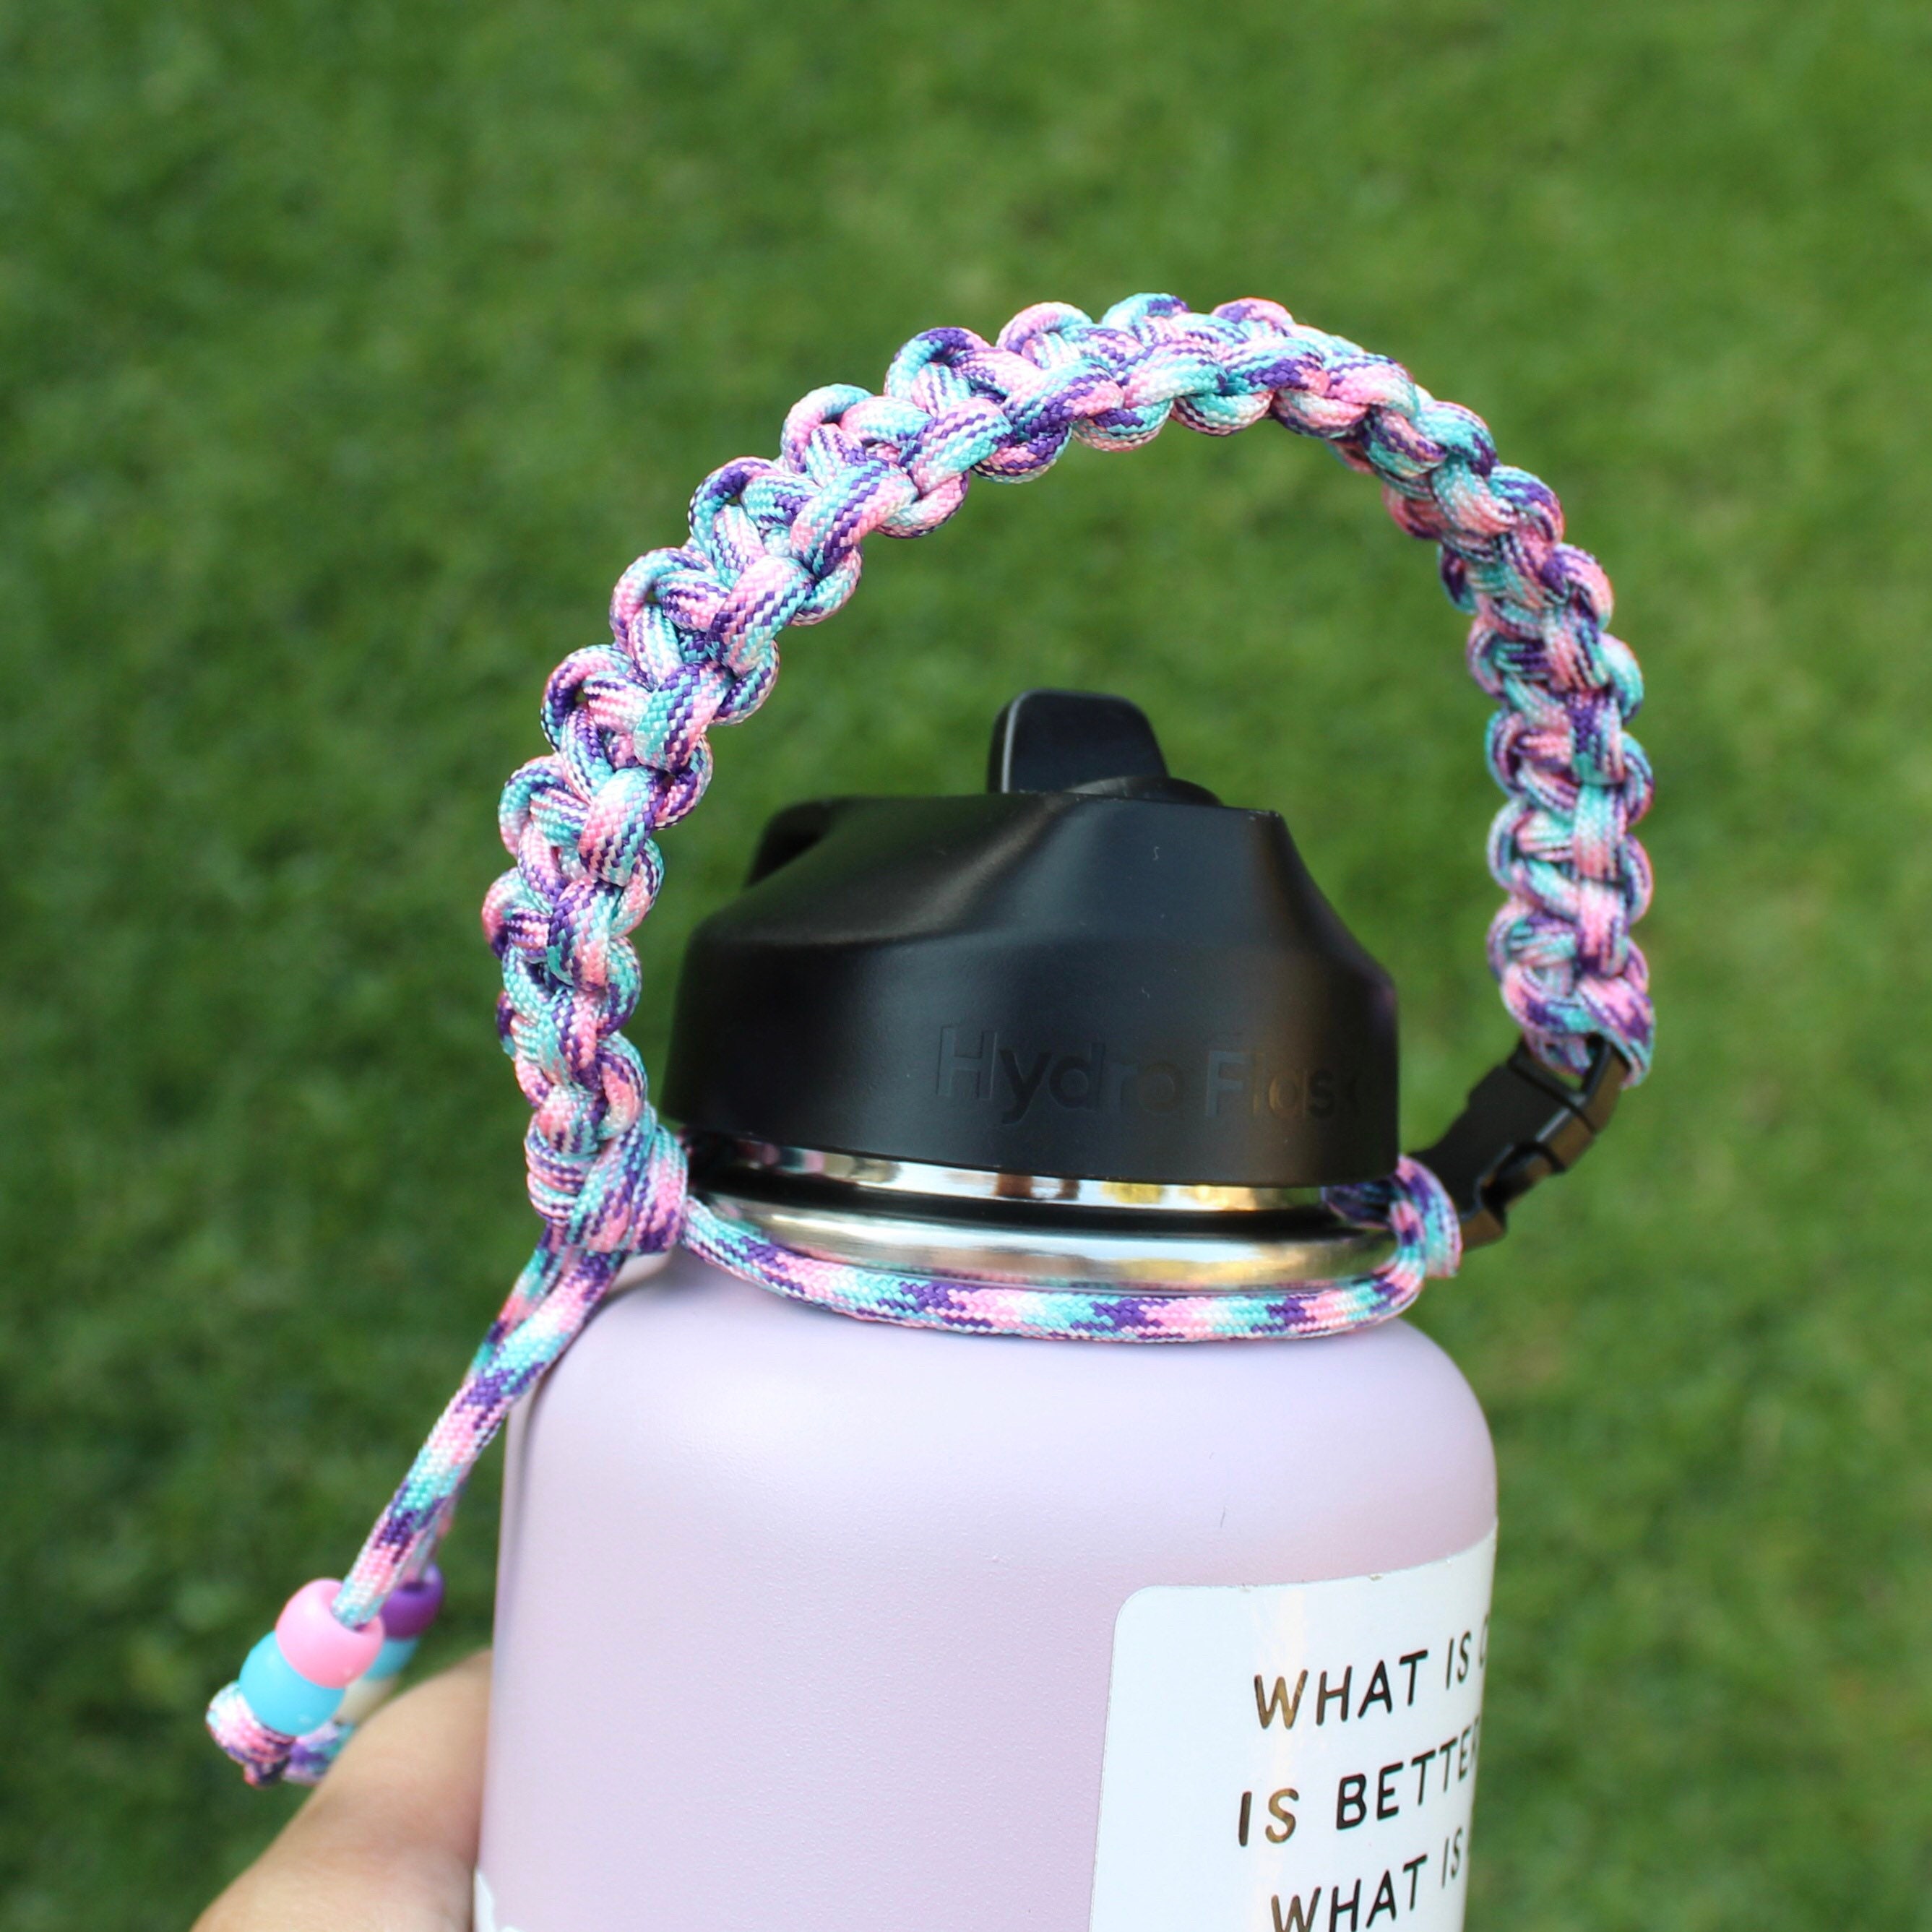  Paracord Handle for Water Bottle  Paracord Handle for Water  Bottle - Non-Slip Hand-Woven Water Bottle Handle Strap with Silicone Boot  Buogint : Sports & Outdoors